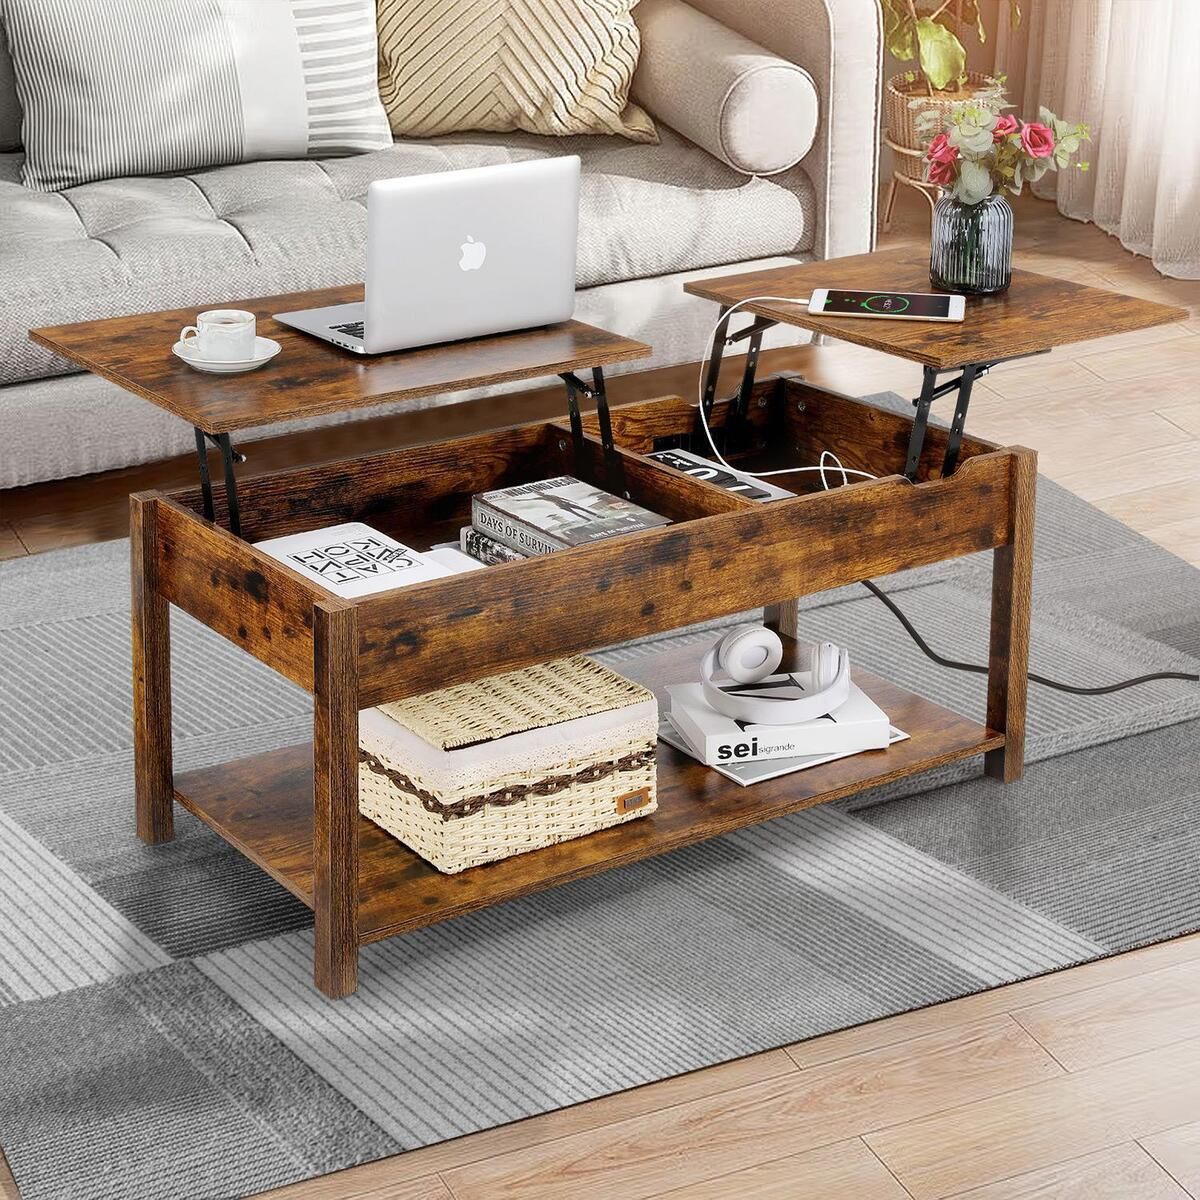 Lift Top Coffee Table With Hidden Storage And Side Drawer For Living  Room/office | Ebay In Lift Top Coffee Tables With Storage Drawers (View 12 of 15)